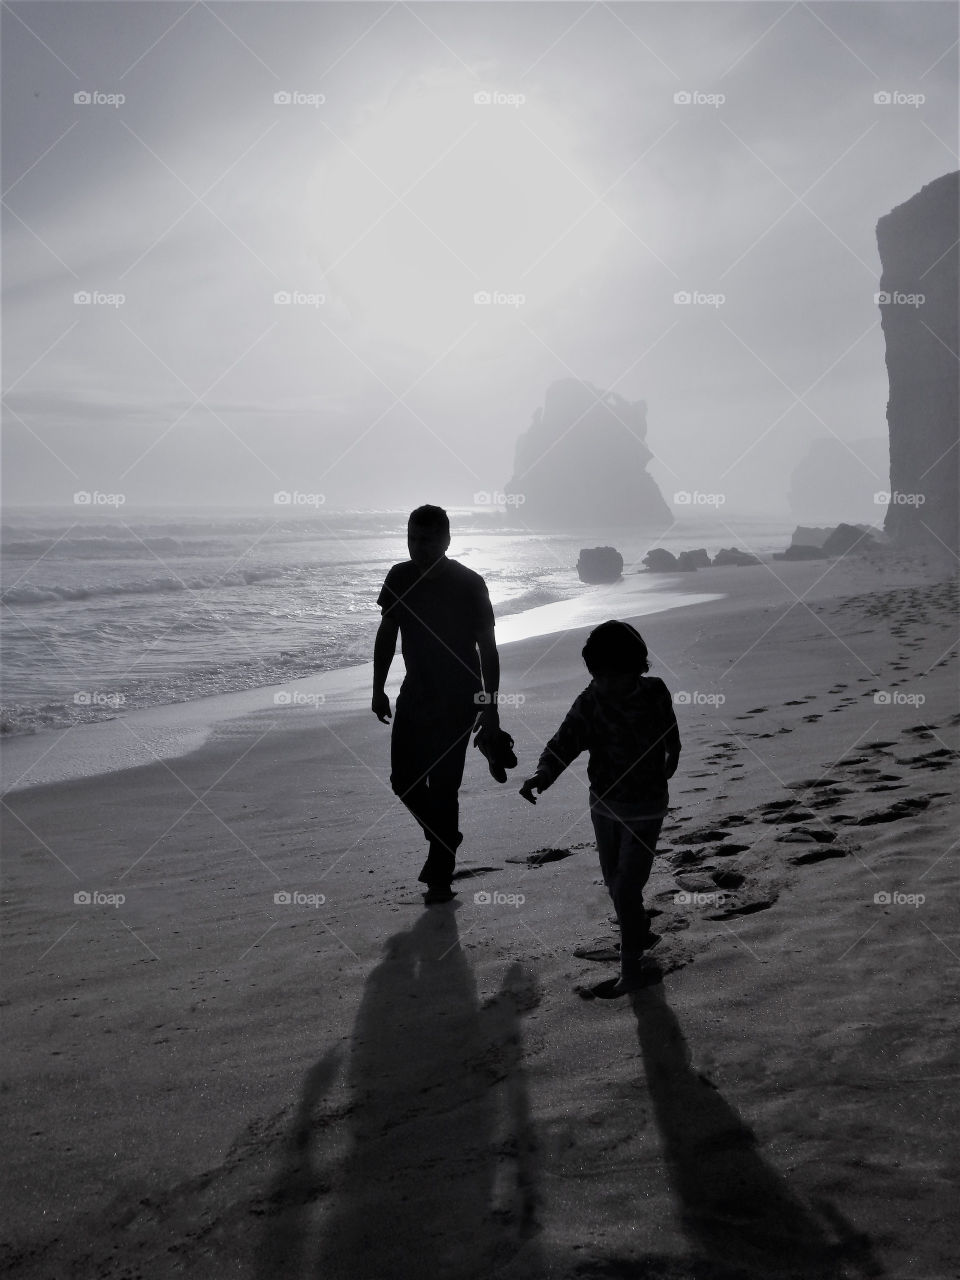 Dad and son silhouettes